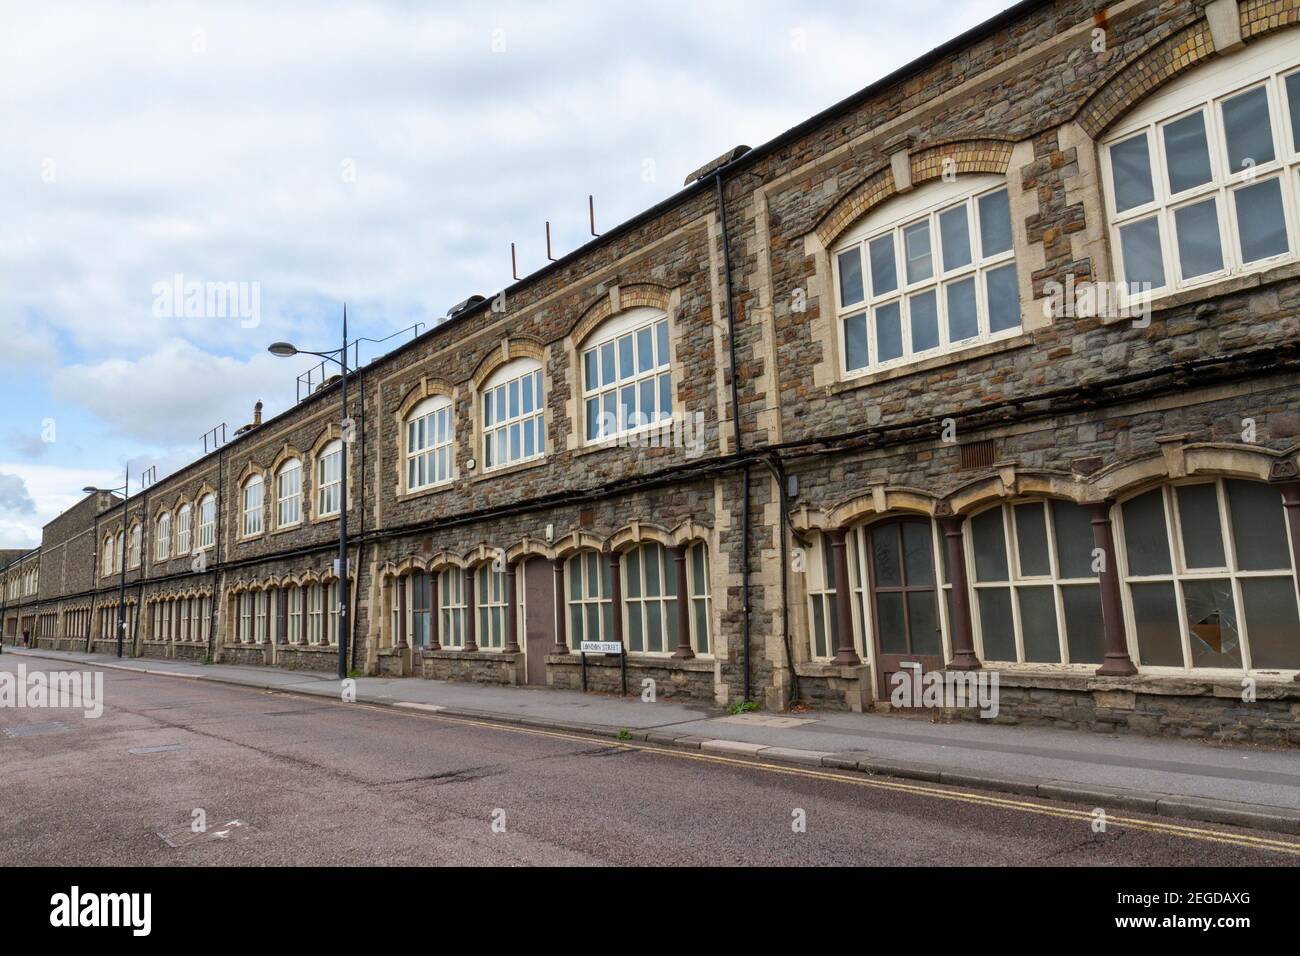 General view of the facade of the old GWR Carriage Works along London Street in Railway Village, Swindon, Wiltshire, UK. Stock Photo